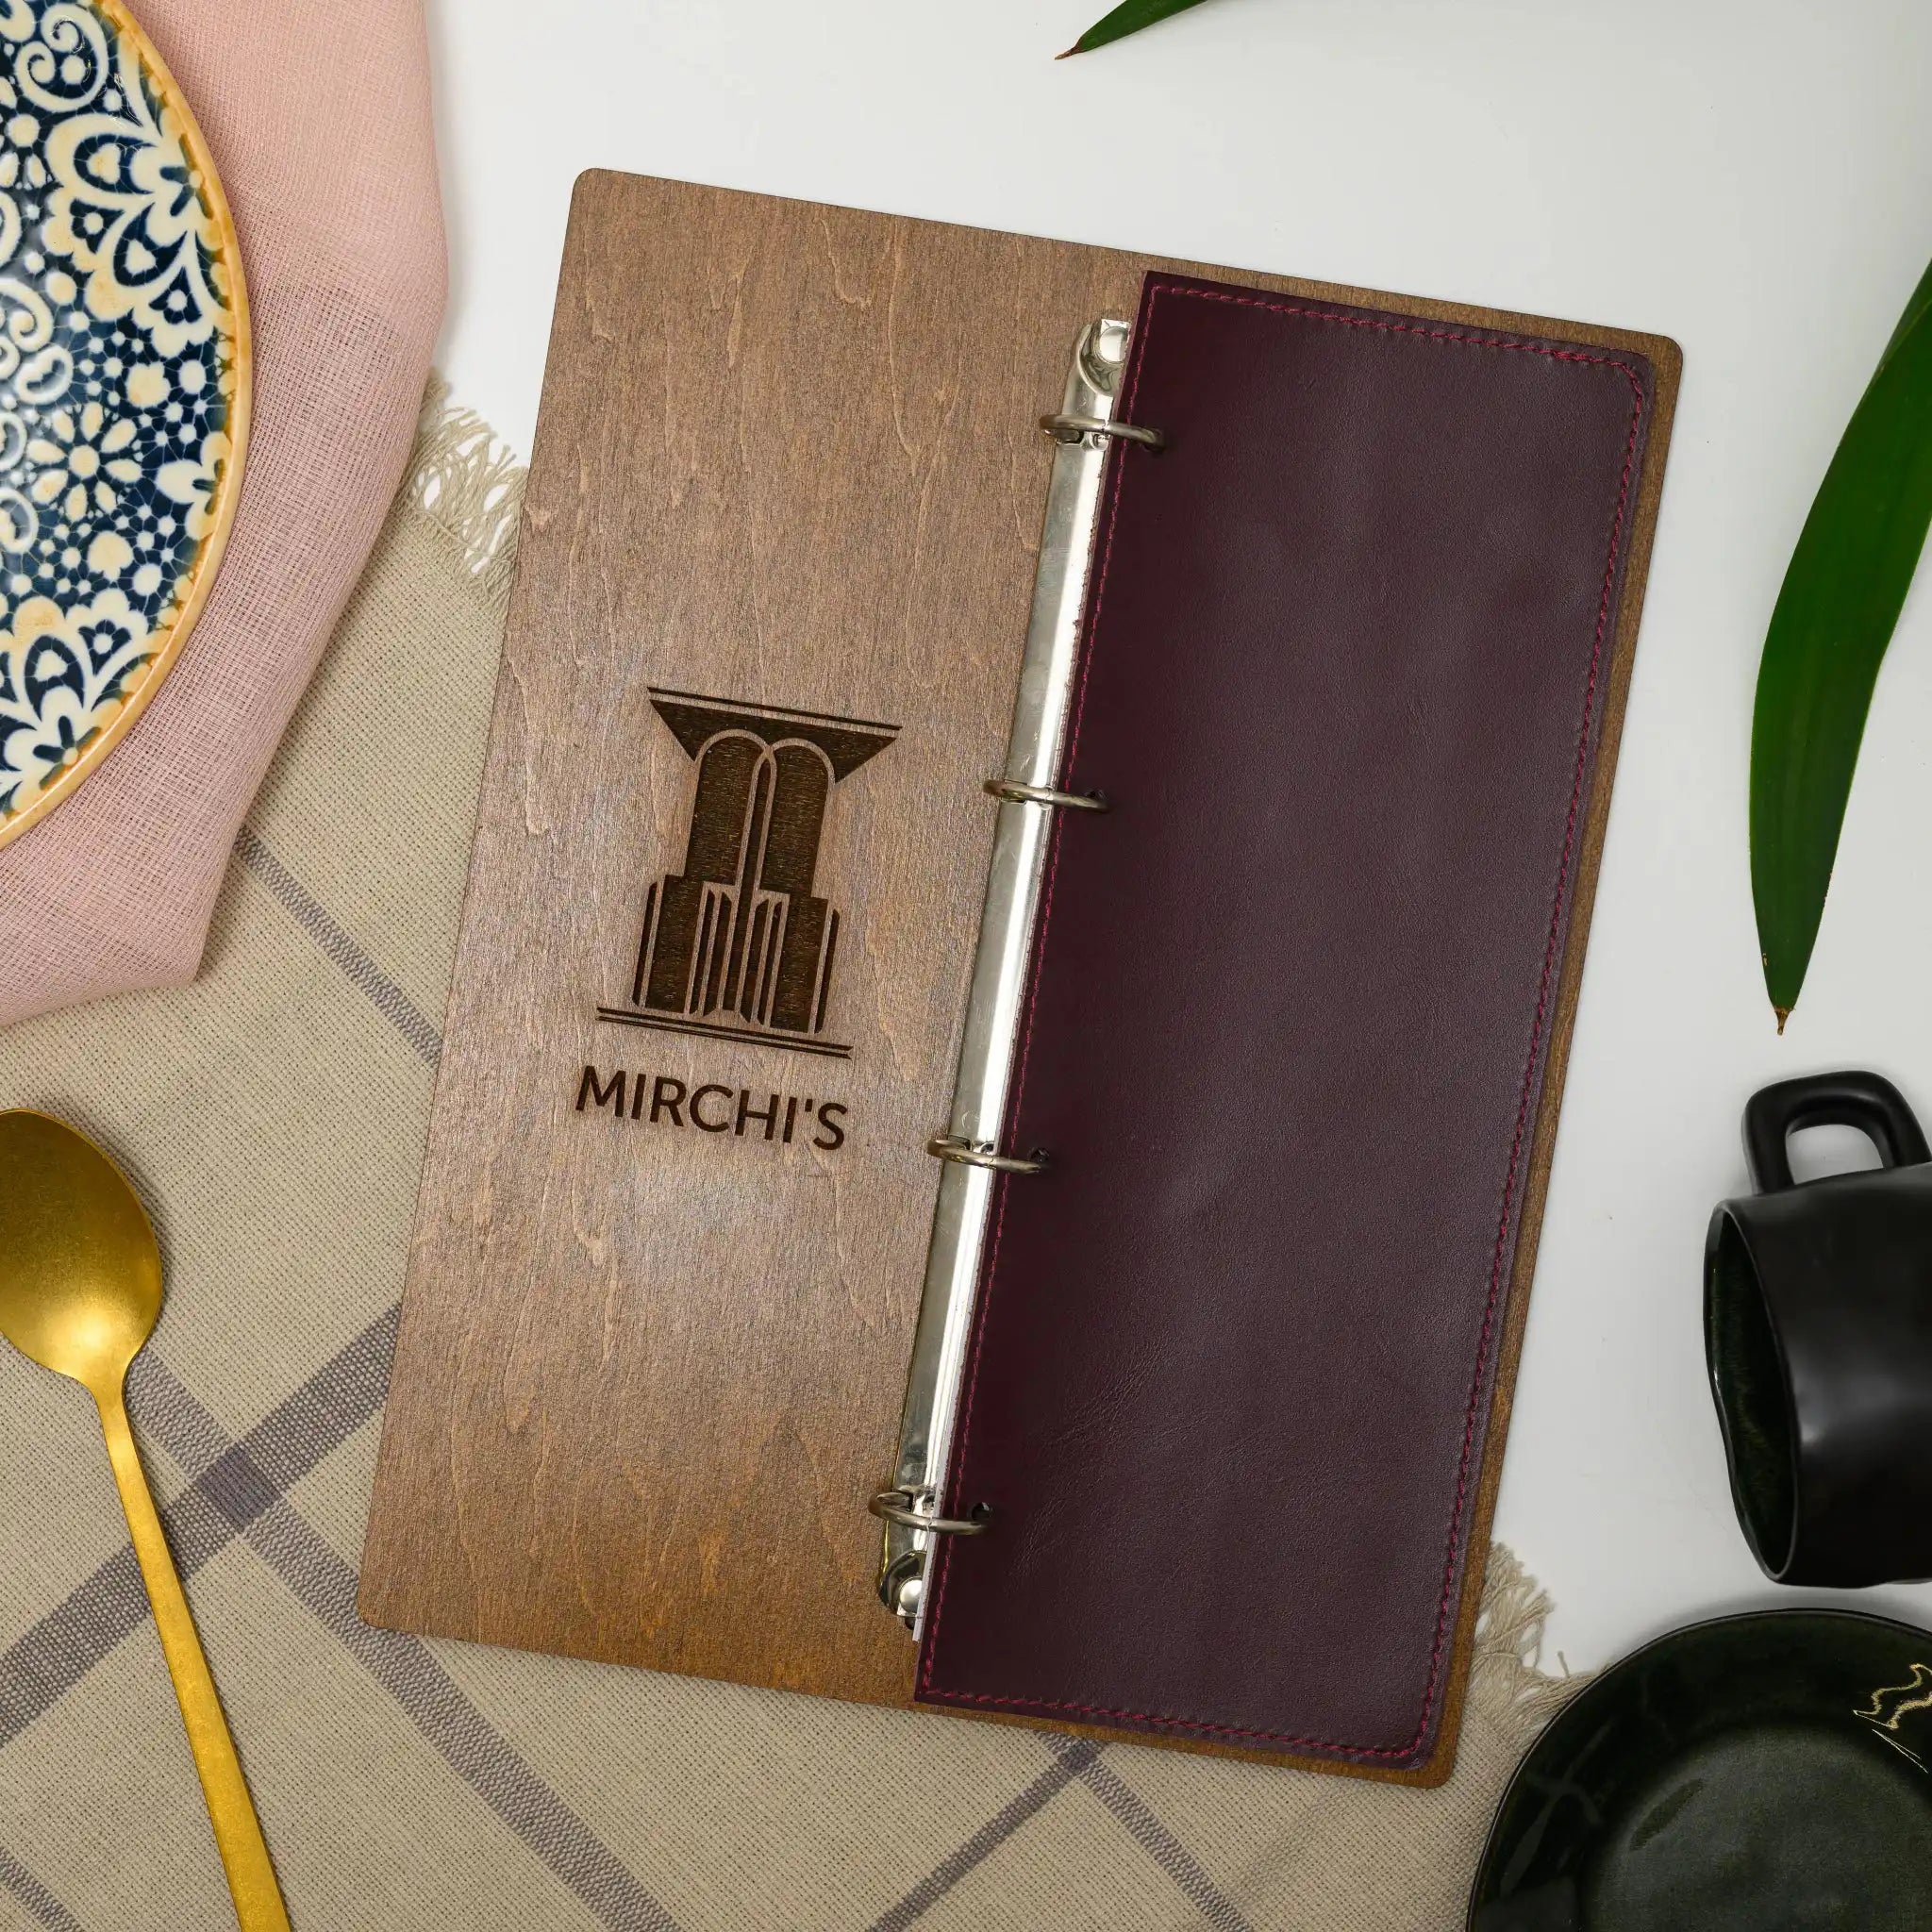 Wooden Menu Board with Leather Cover: A rustic touch of elegance for your menu presentation.